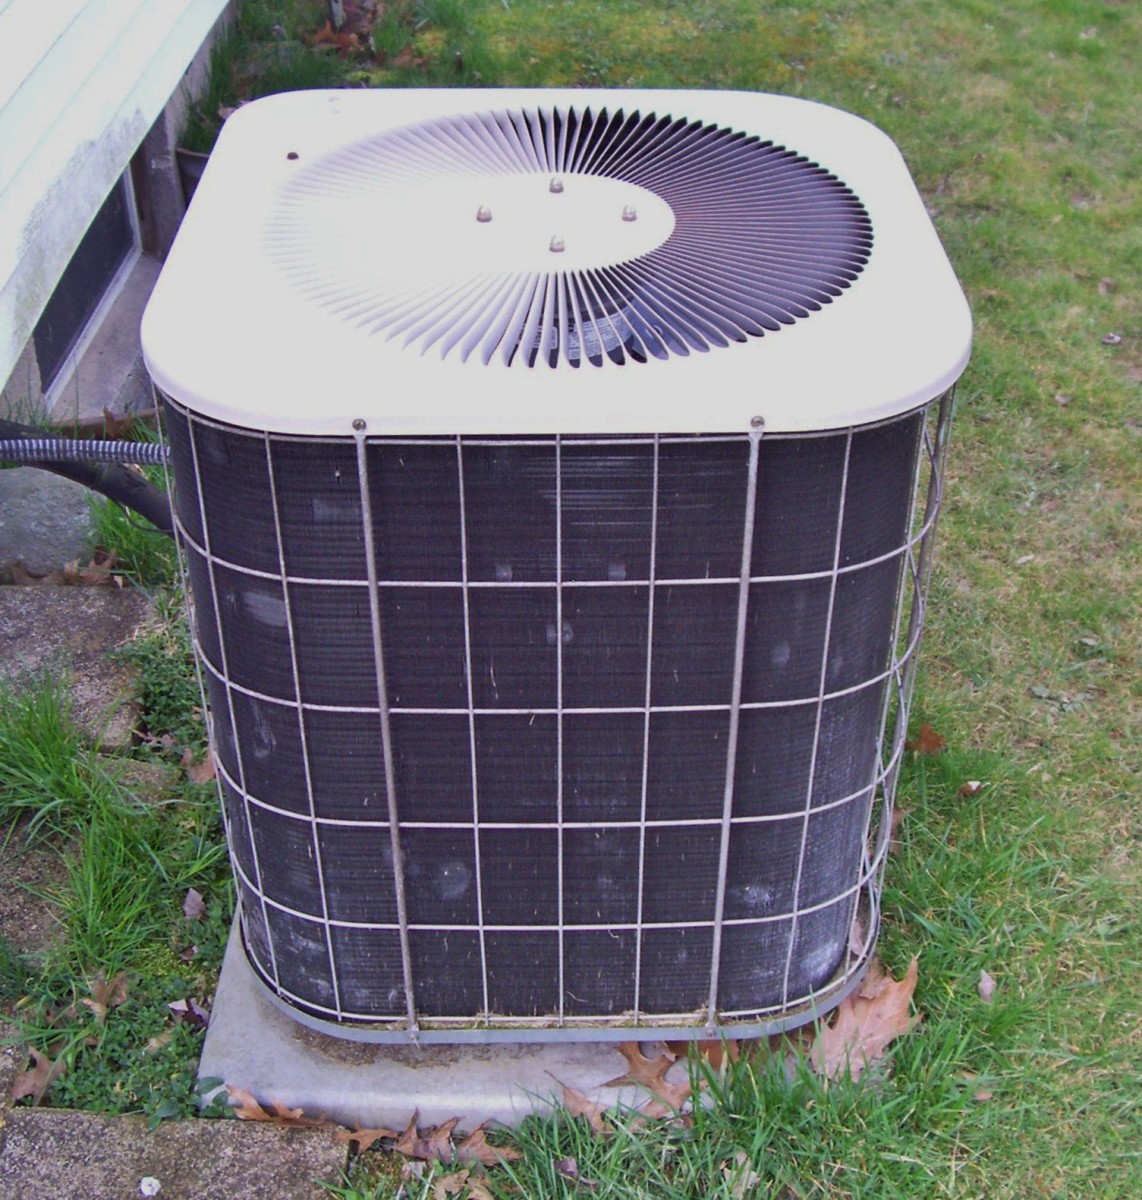 Though many refer to this as their air conditioner, truly it is only part of a split system. The condenser it the proper name of this unit because it condenses the refrigerant back into a liquid from a gas.